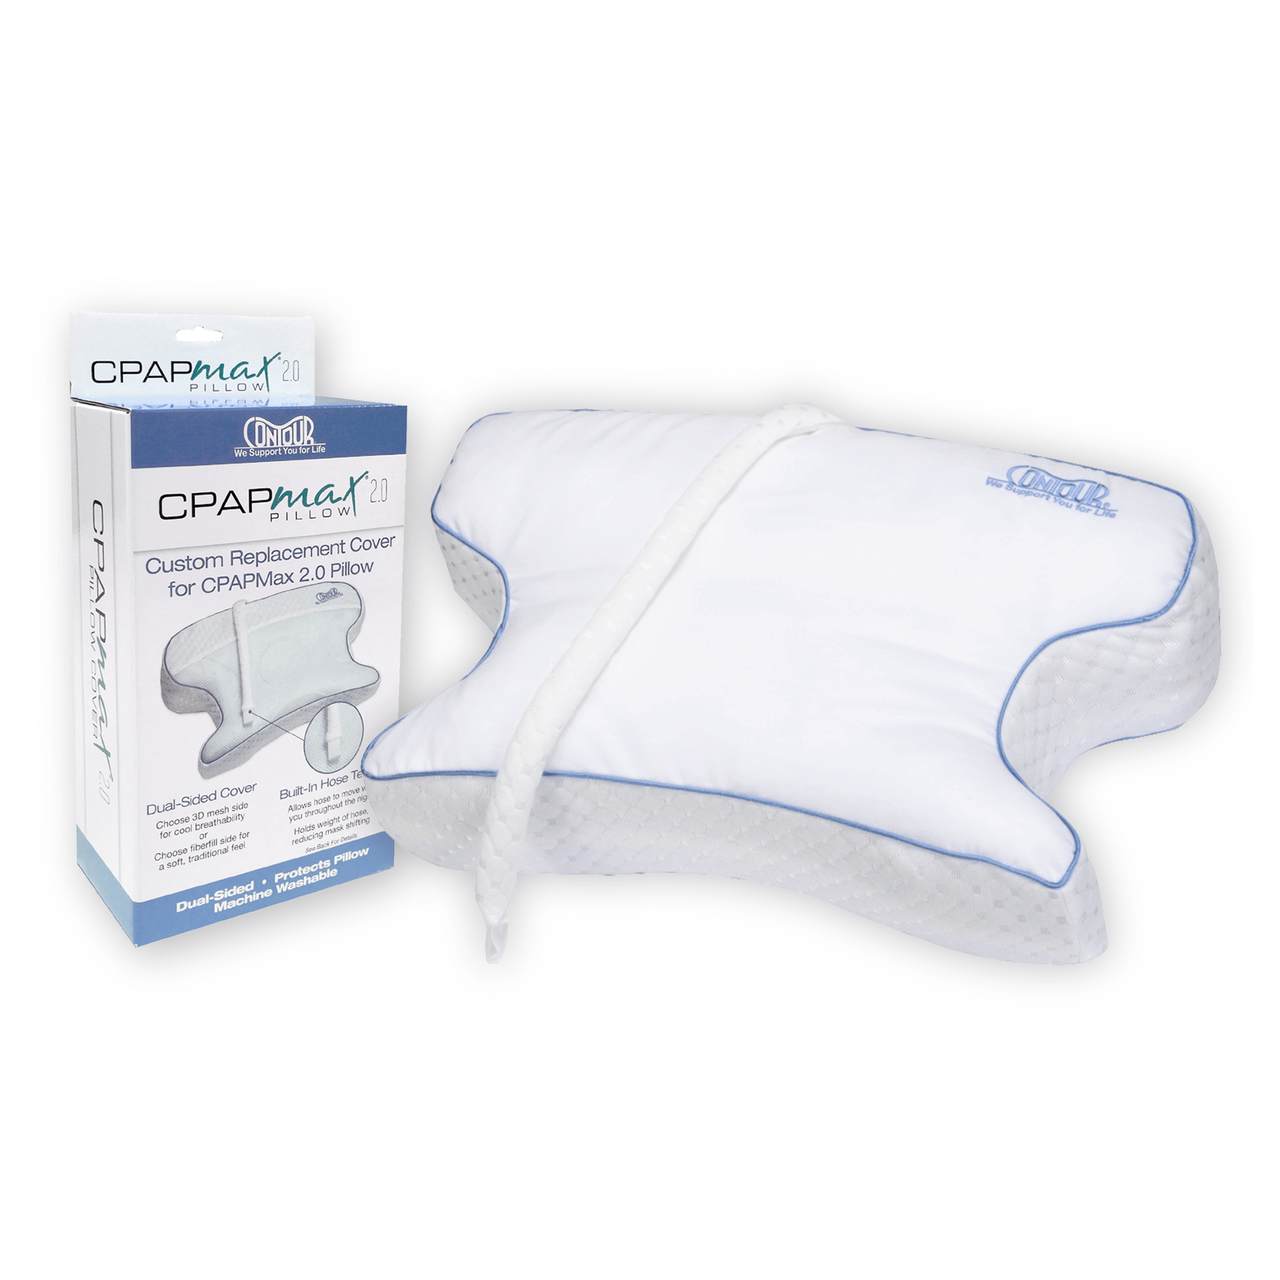 Cpapmax Pillow 2 0 Replacement Cover For Cpapmax Pillow 2 0